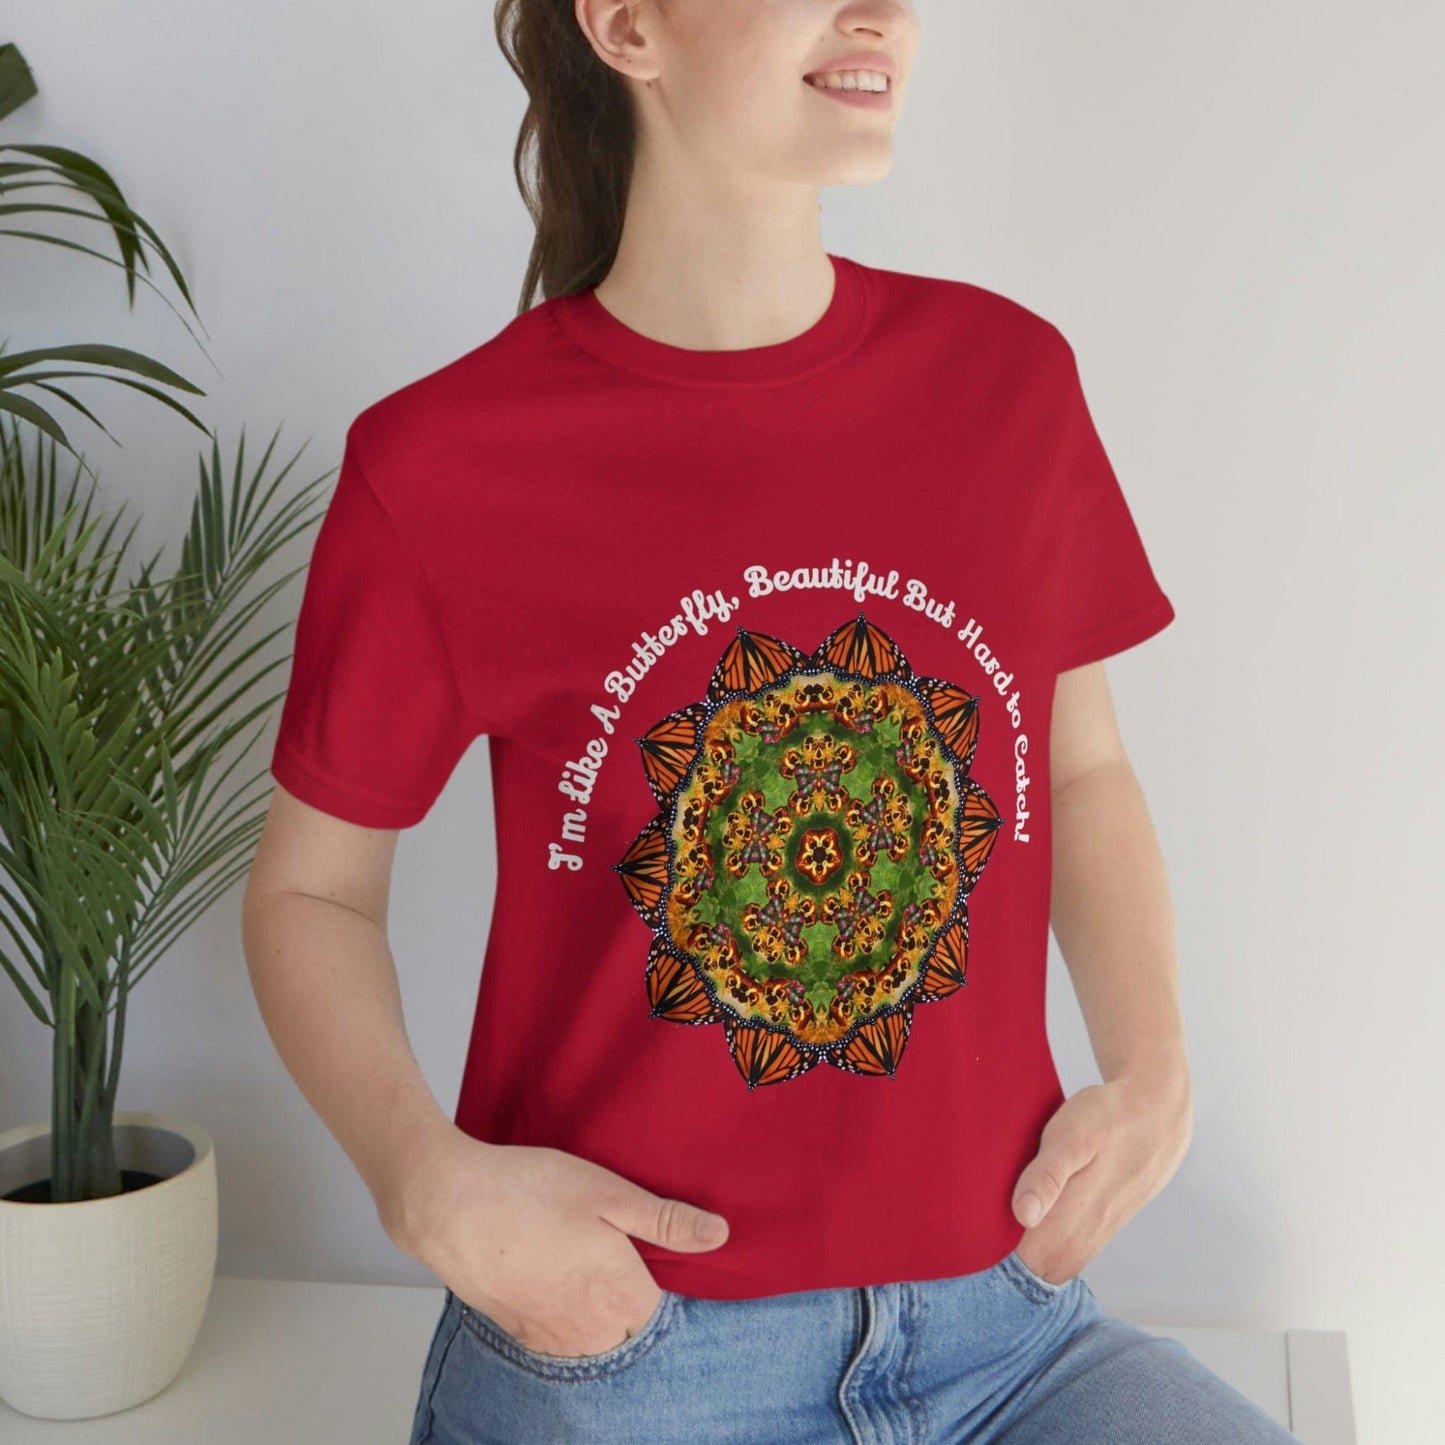 Monarch Butterfly Top, Zen Mystical Poet Shirt, Insect Shirt, Cute Shirts I'm Like A Butterfly, Beautiful But Hard To Catch